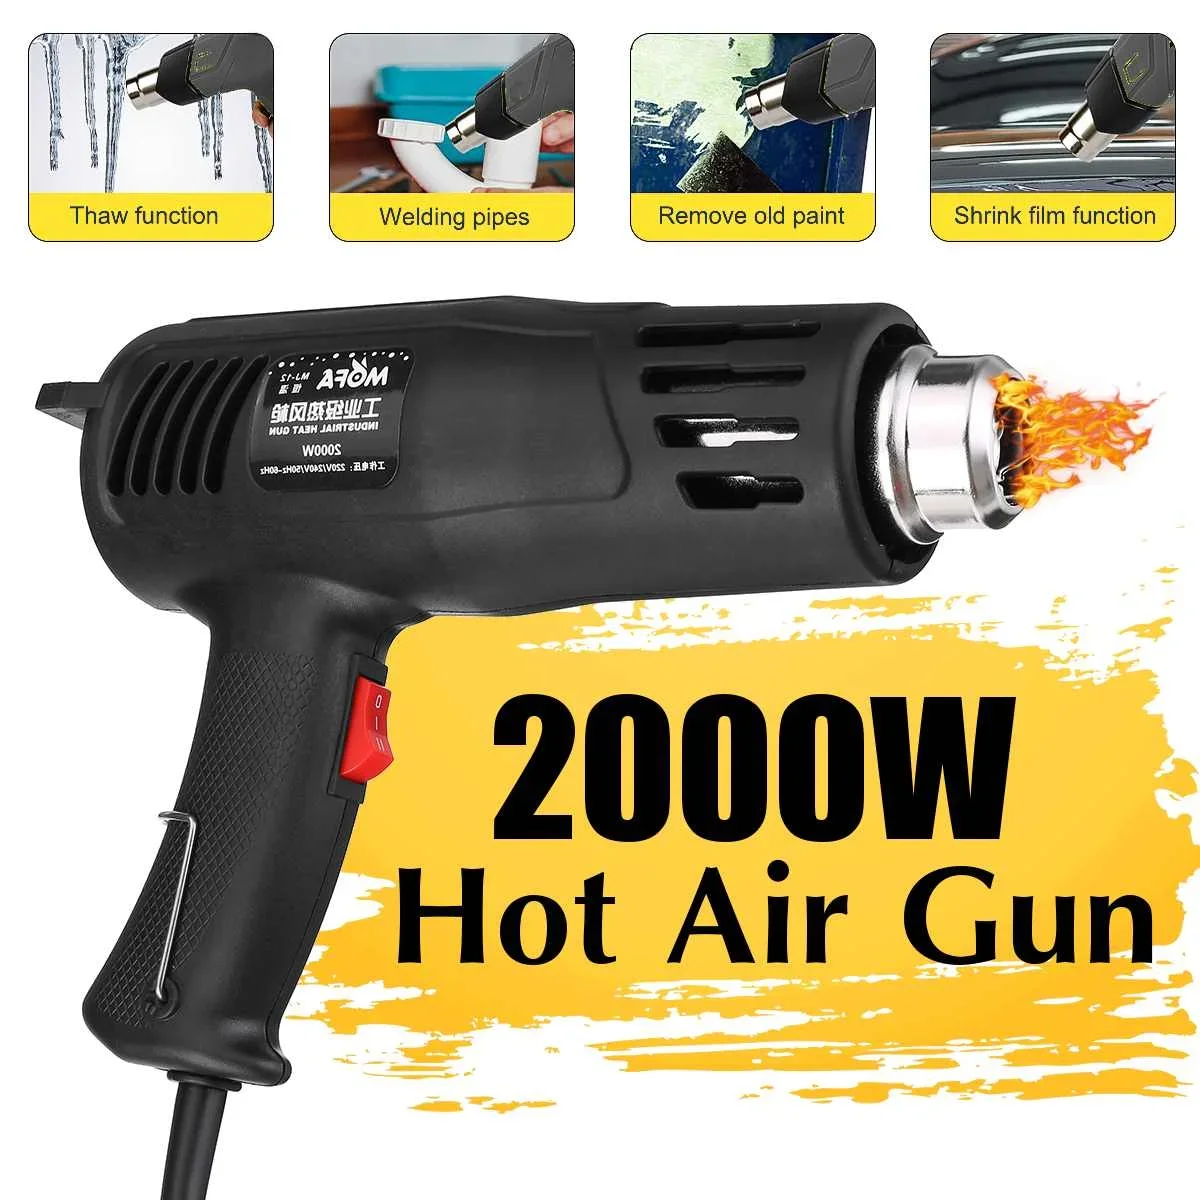 

2000W 220V Advanced Hot Air Gun Temperatures Adjustable Electric Heat Gun for Shrink Wrapping Industrial Building Hair Dryer